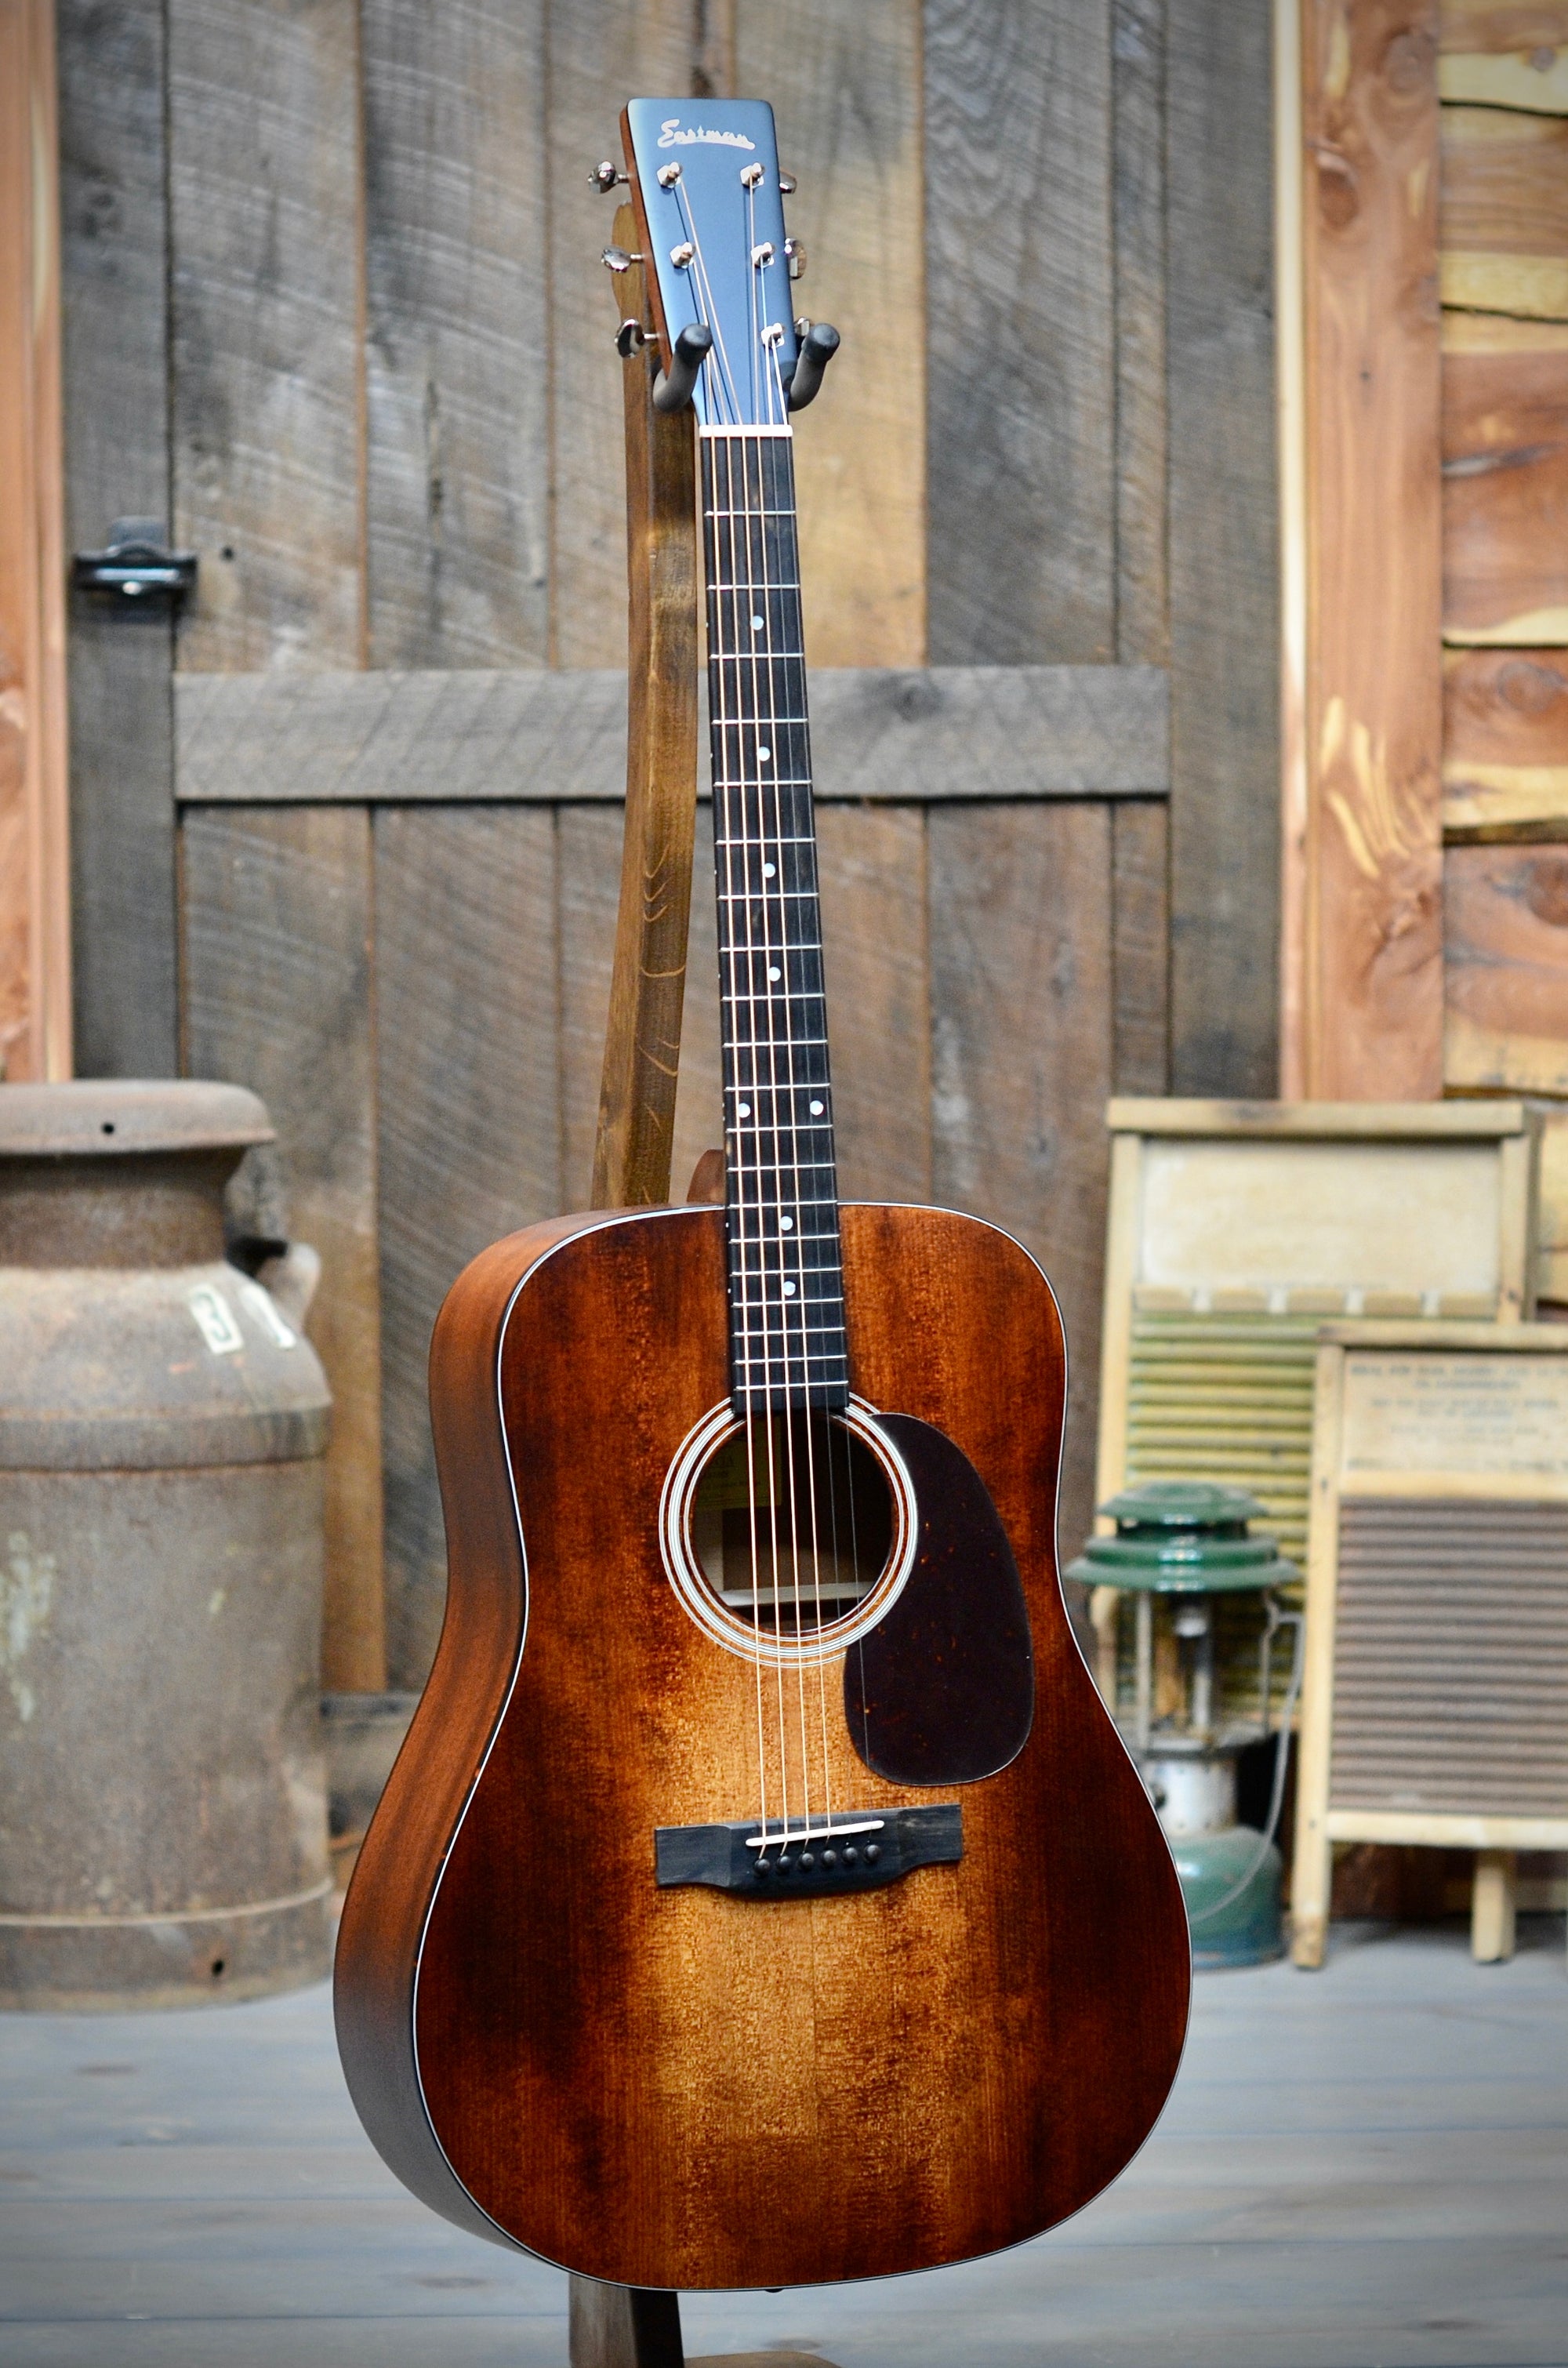 Guitar　With　Store　Eastman　E1D-CLA　Dreadnought　Acoustic　Classic　Finish　Ben's　Case　Banjo　General